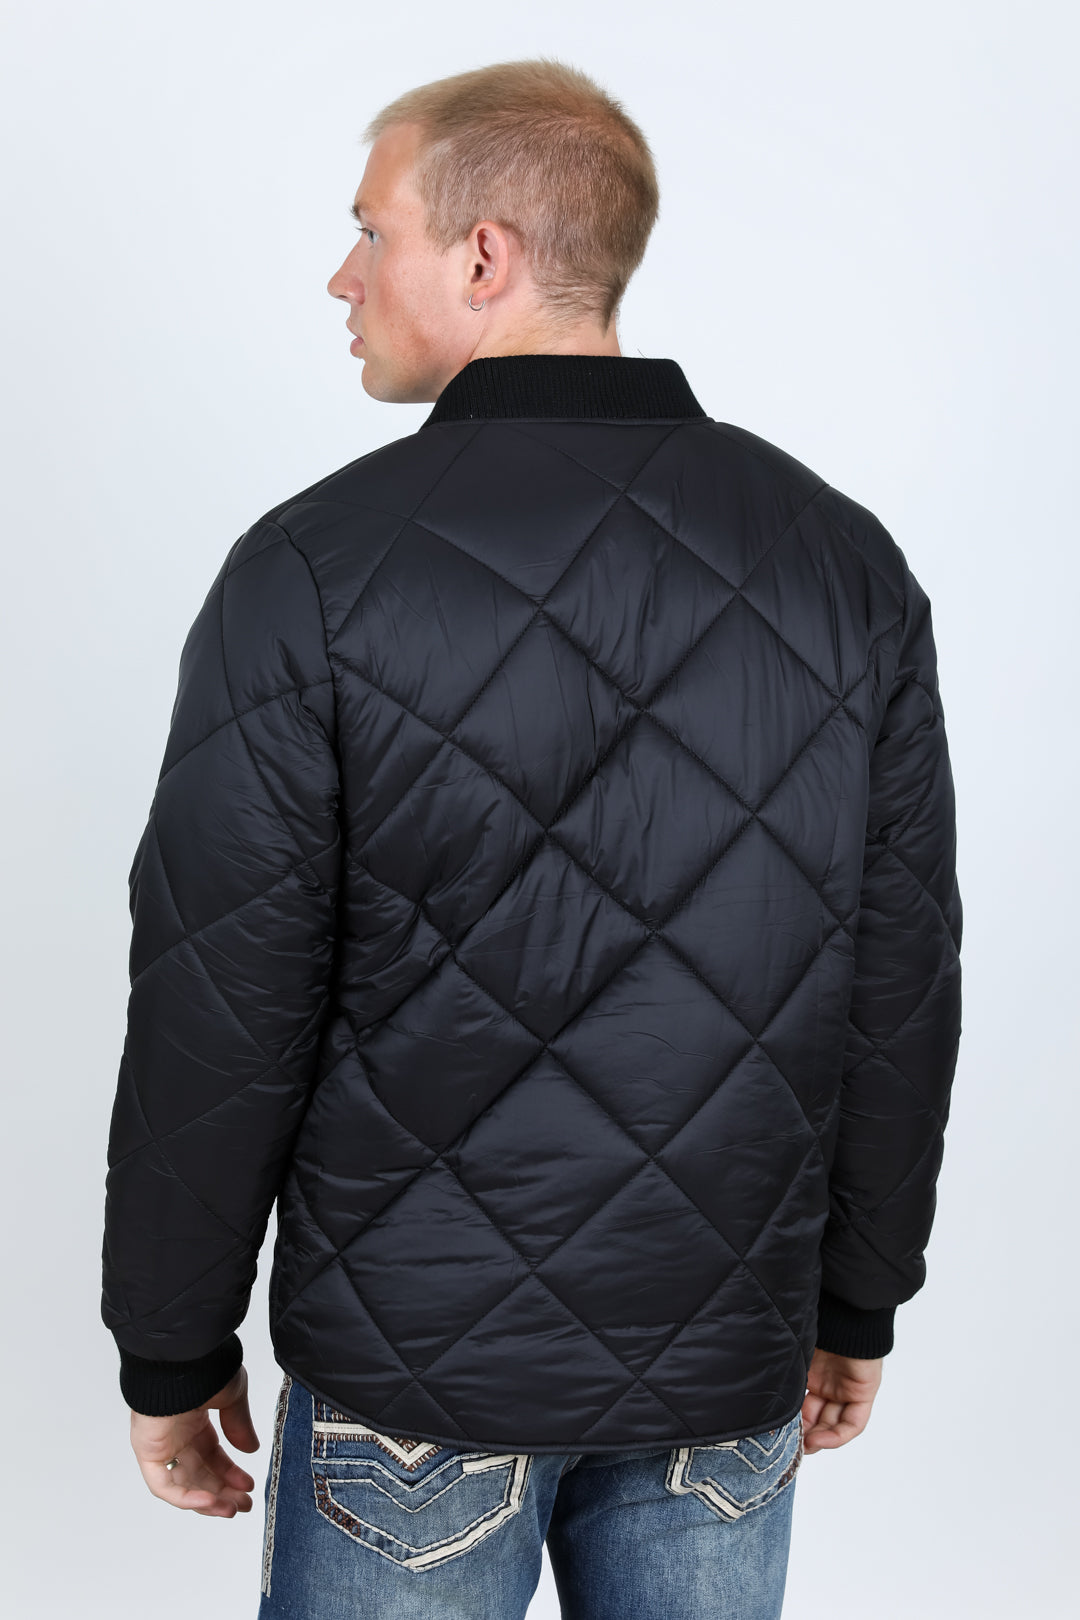 Mens Insulated Reversible Jacket - Black